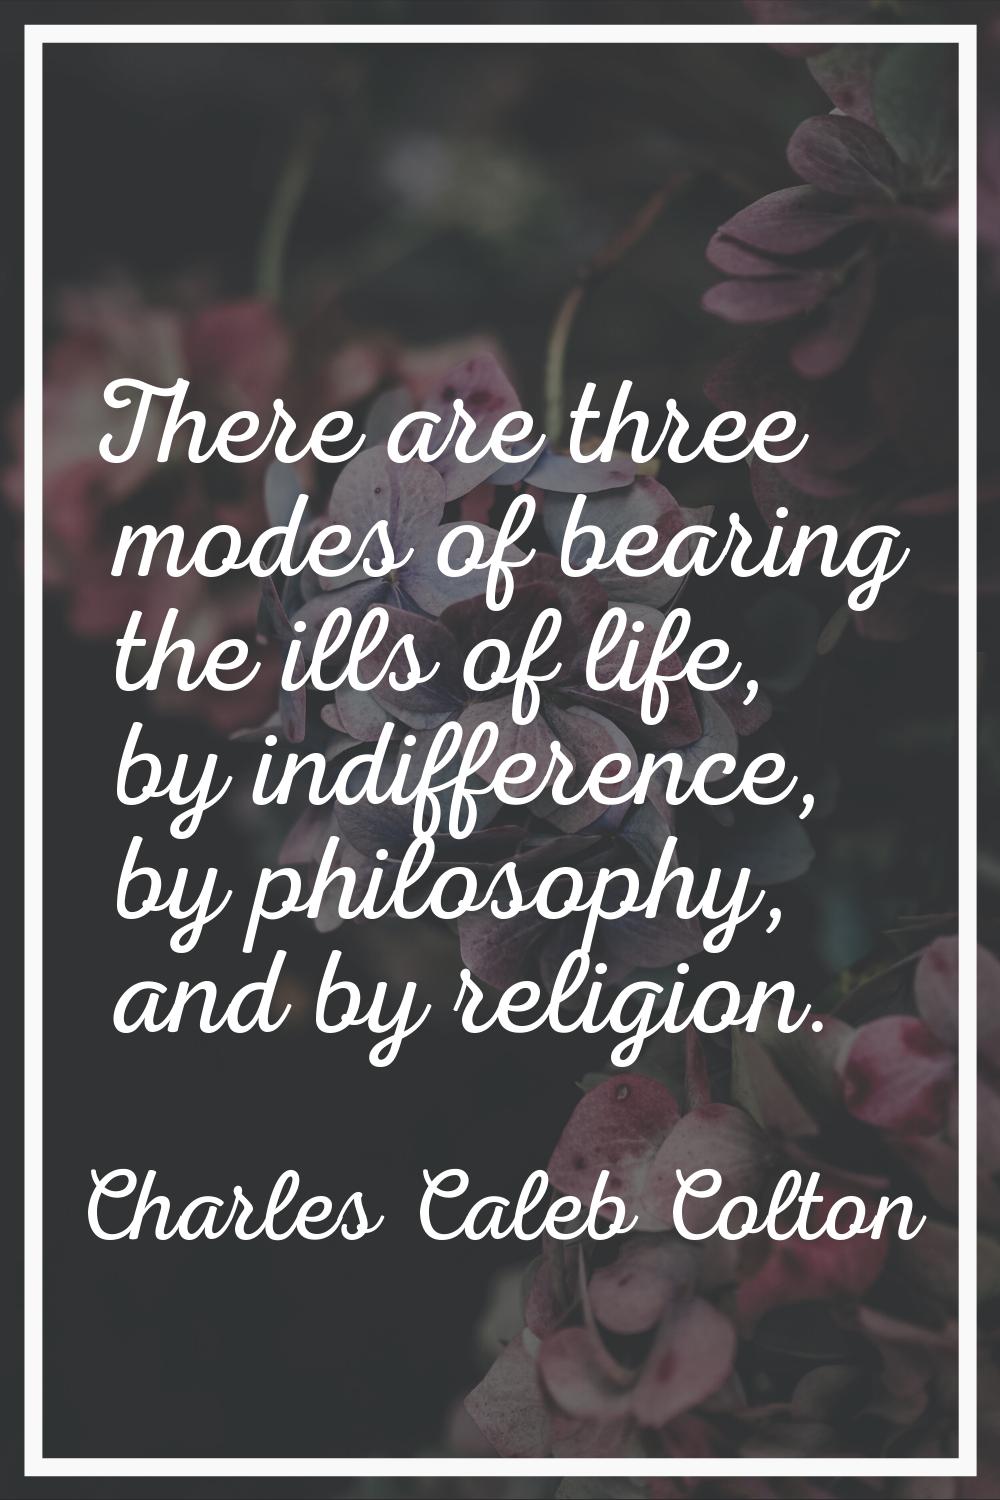 There are three modes of bearing the ills of life, by indifference, by philosophy, and by religion.